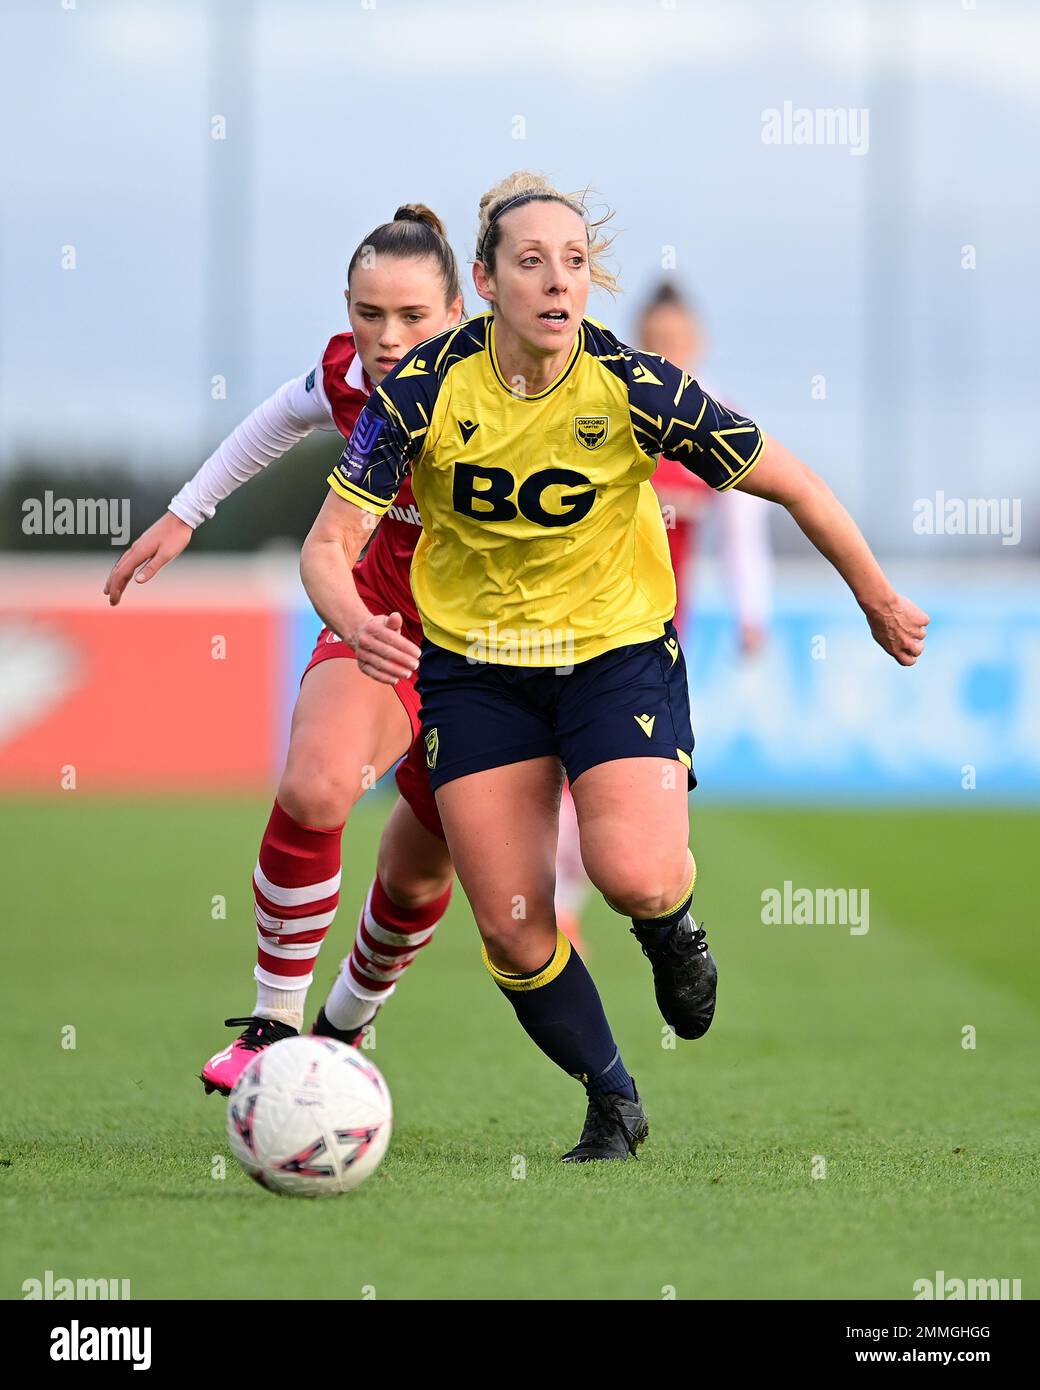 Bristol, UK. 29th January, 2023. Shelly Provan of Oxford United W.F.C. - Mandatory by-line: Ashley Crowden  - 29/01/2023 - FOOTBALL - Robins High Performance Centre - Bristol, England - Bristol City Women vs Oxford United Women - The Women's FA Cup - Fourth Round Credit: Ashley Crowden/Alamy Live News Stock Photo